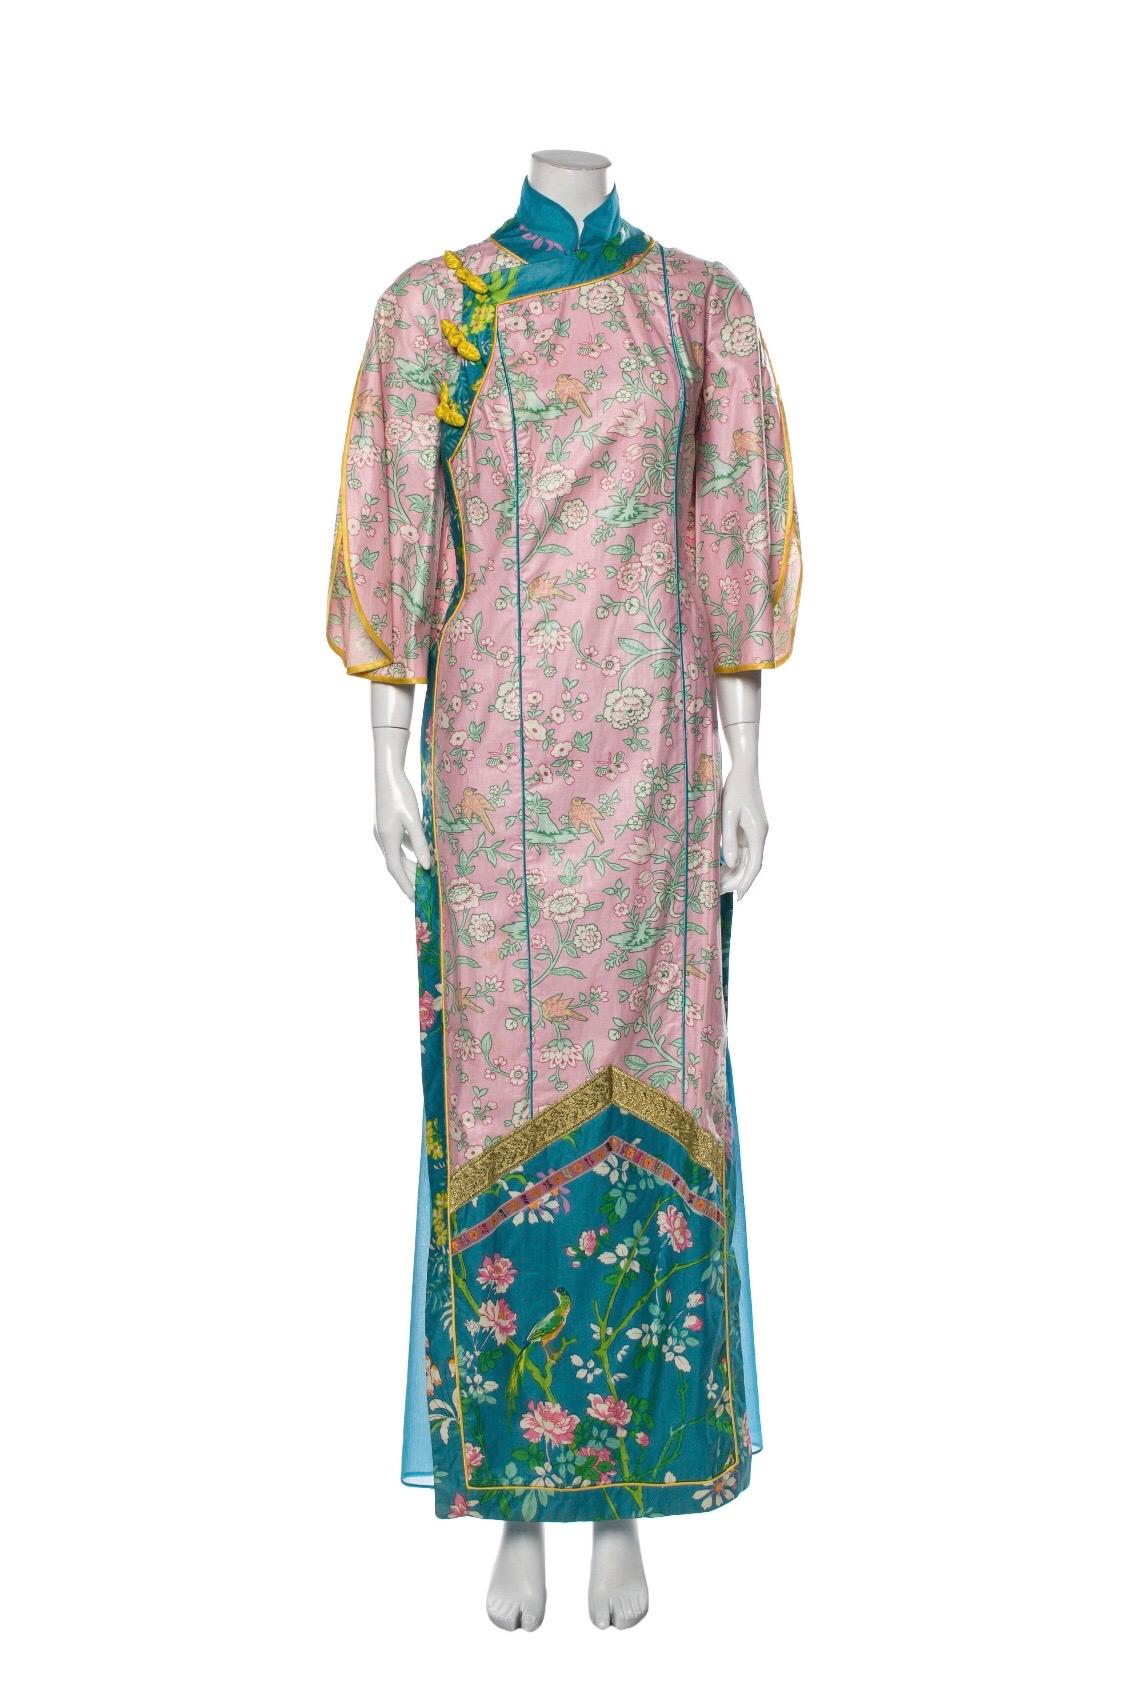 Add a stunning new piece to your wardrobe with this Giorgio di Sant' Angelo for Saks Fifth Avenue dress! Circa 1970s, this colorful kimono dress features multiple contrasting Asian inspired motifs, a blue slip skirt, Mandarin collar, slits on both